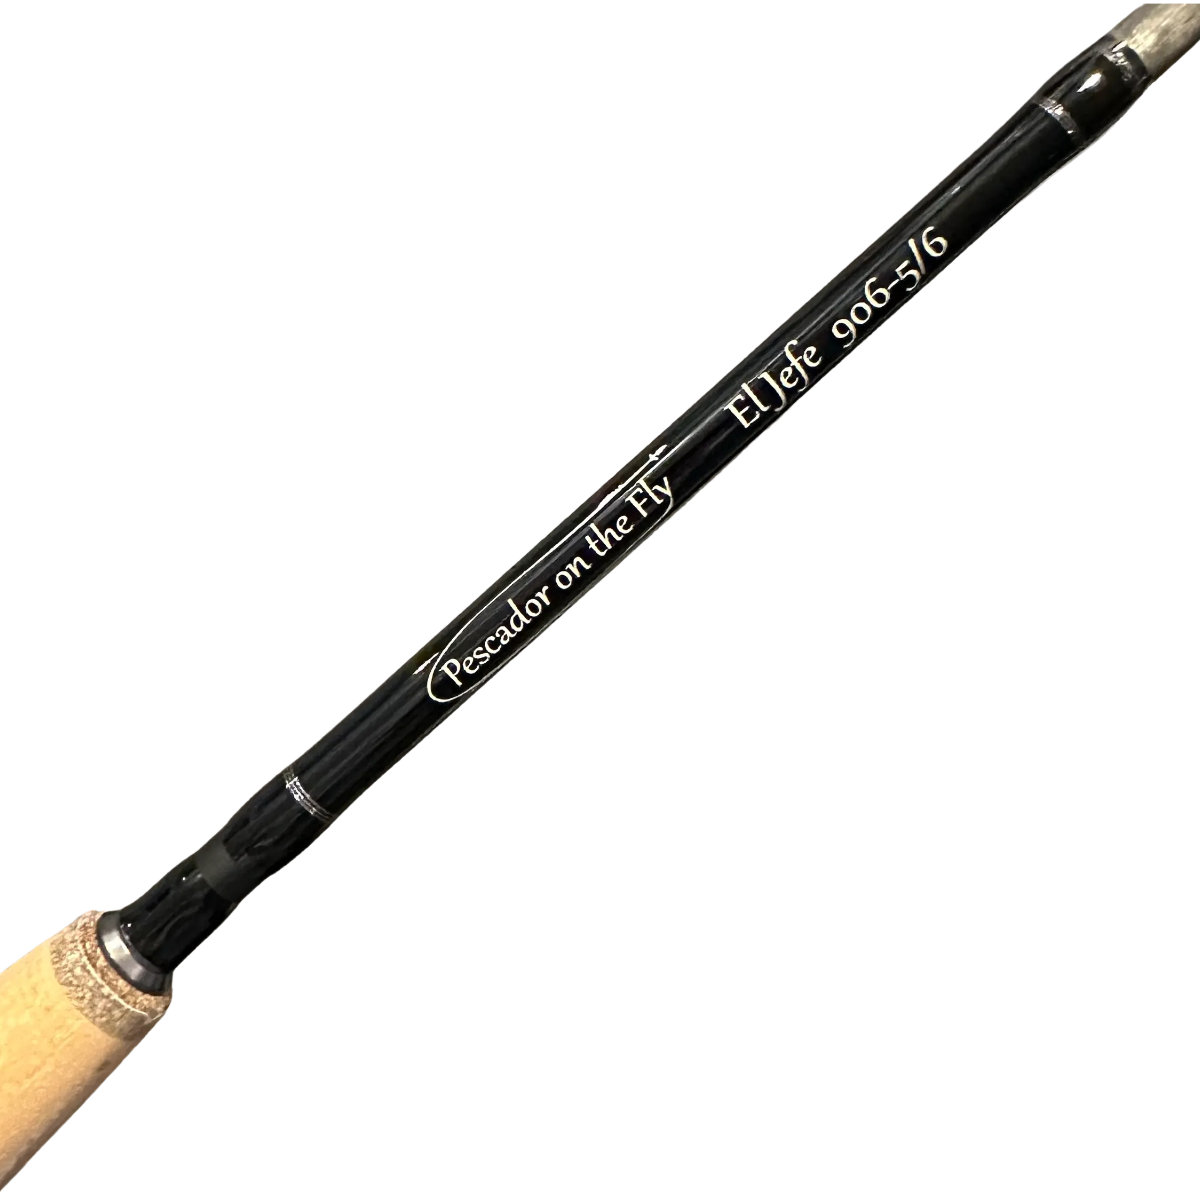 EL JEFE PACKABLE FLY FISHING RODS | 906-5/6 | 9 Foot 6 Section 5 or 6 Weight Fly Rod